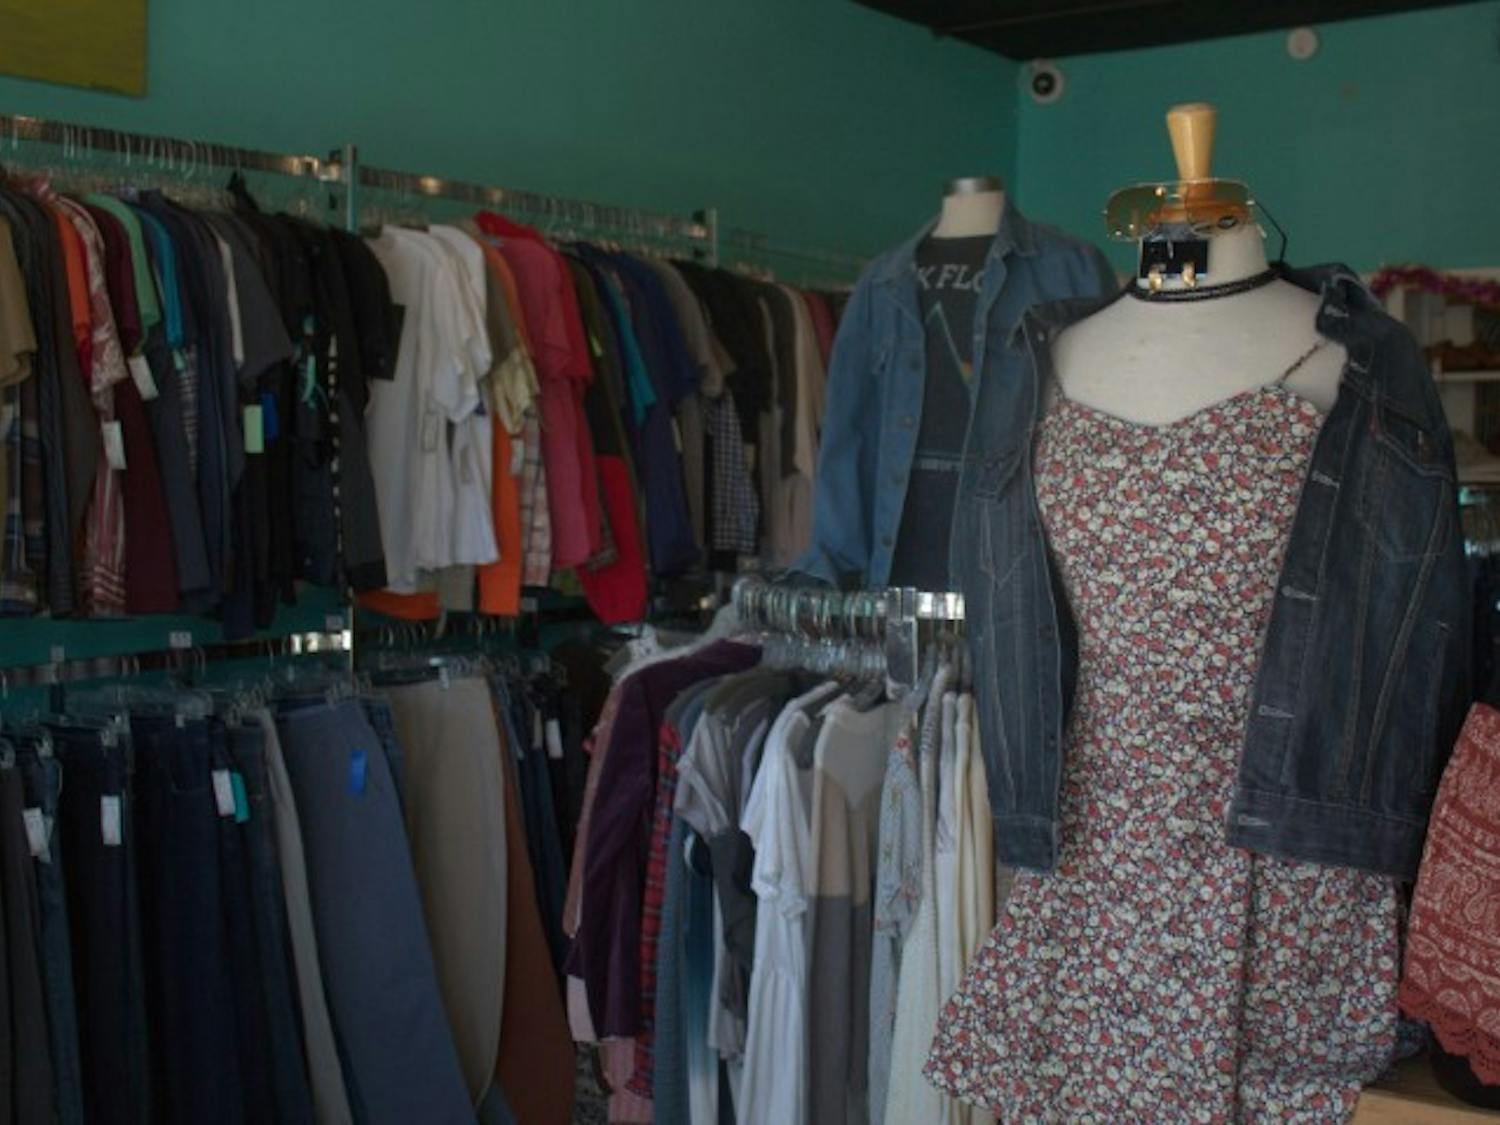 A collection of clothes sits on display at Sid &amp; Nancy, a thrift store in Five Points.